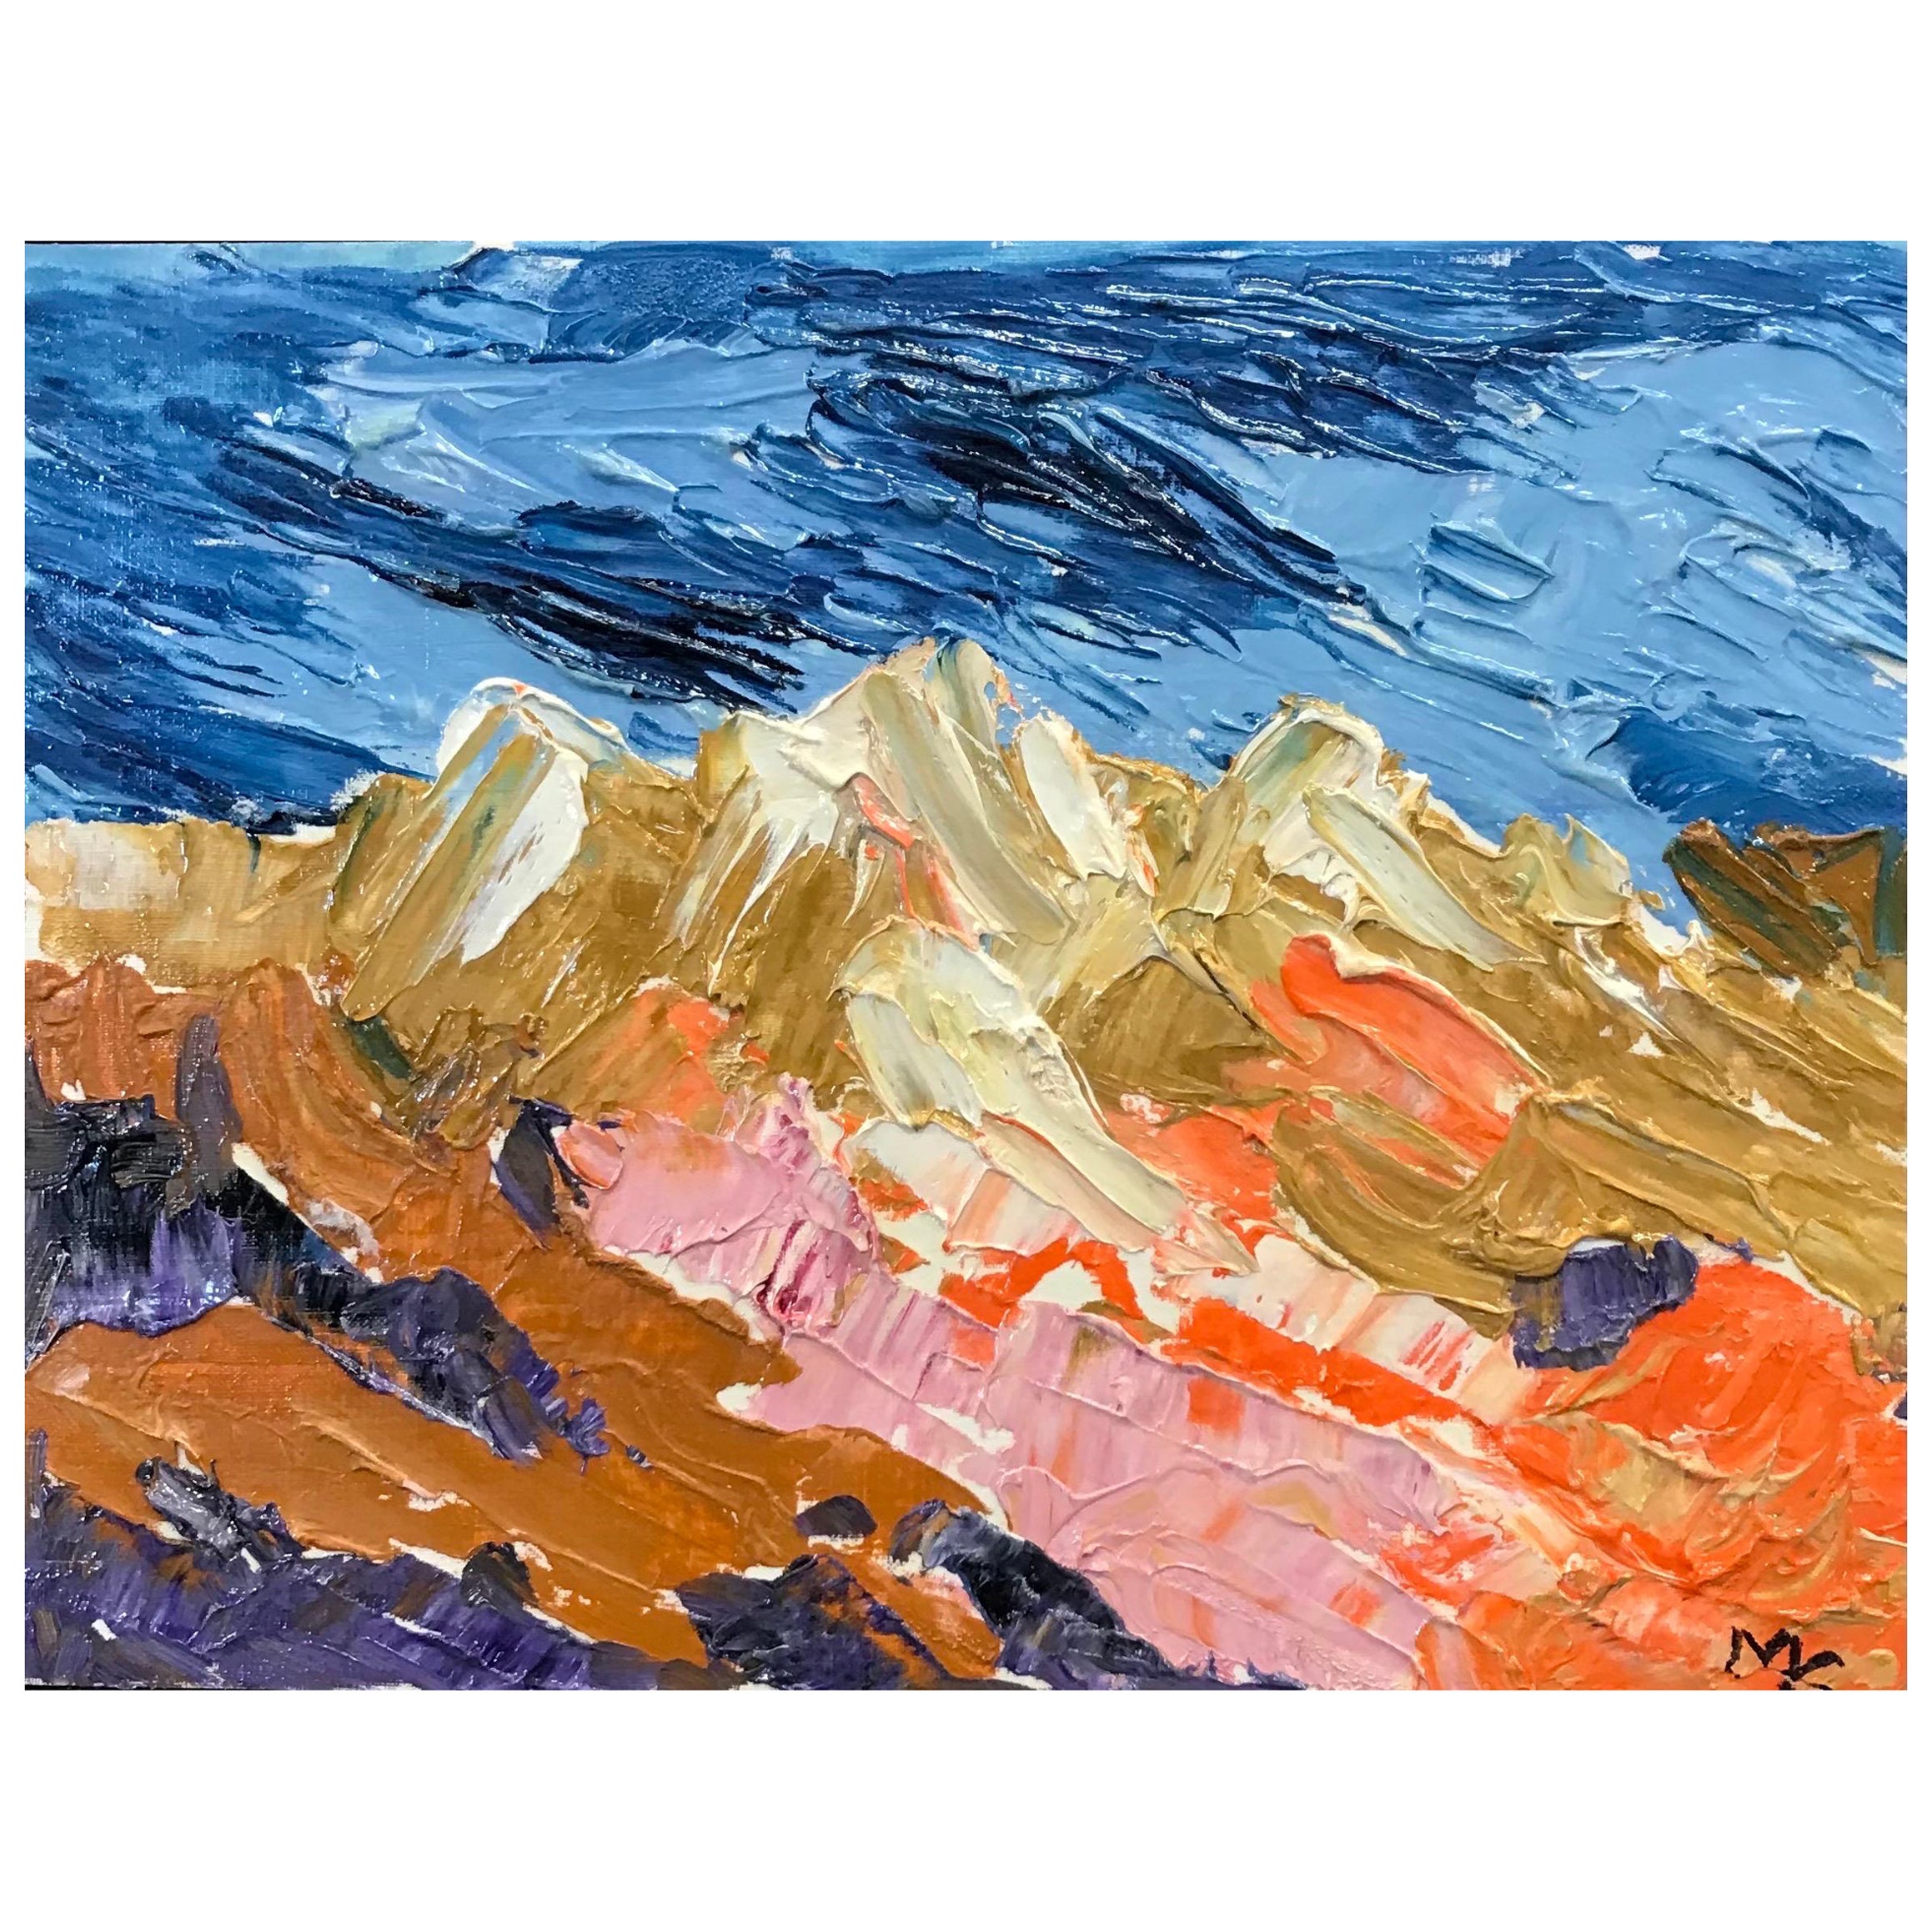 Bright & Colorful French Impressionist Oil Painting - Blue Sky Over Mountains